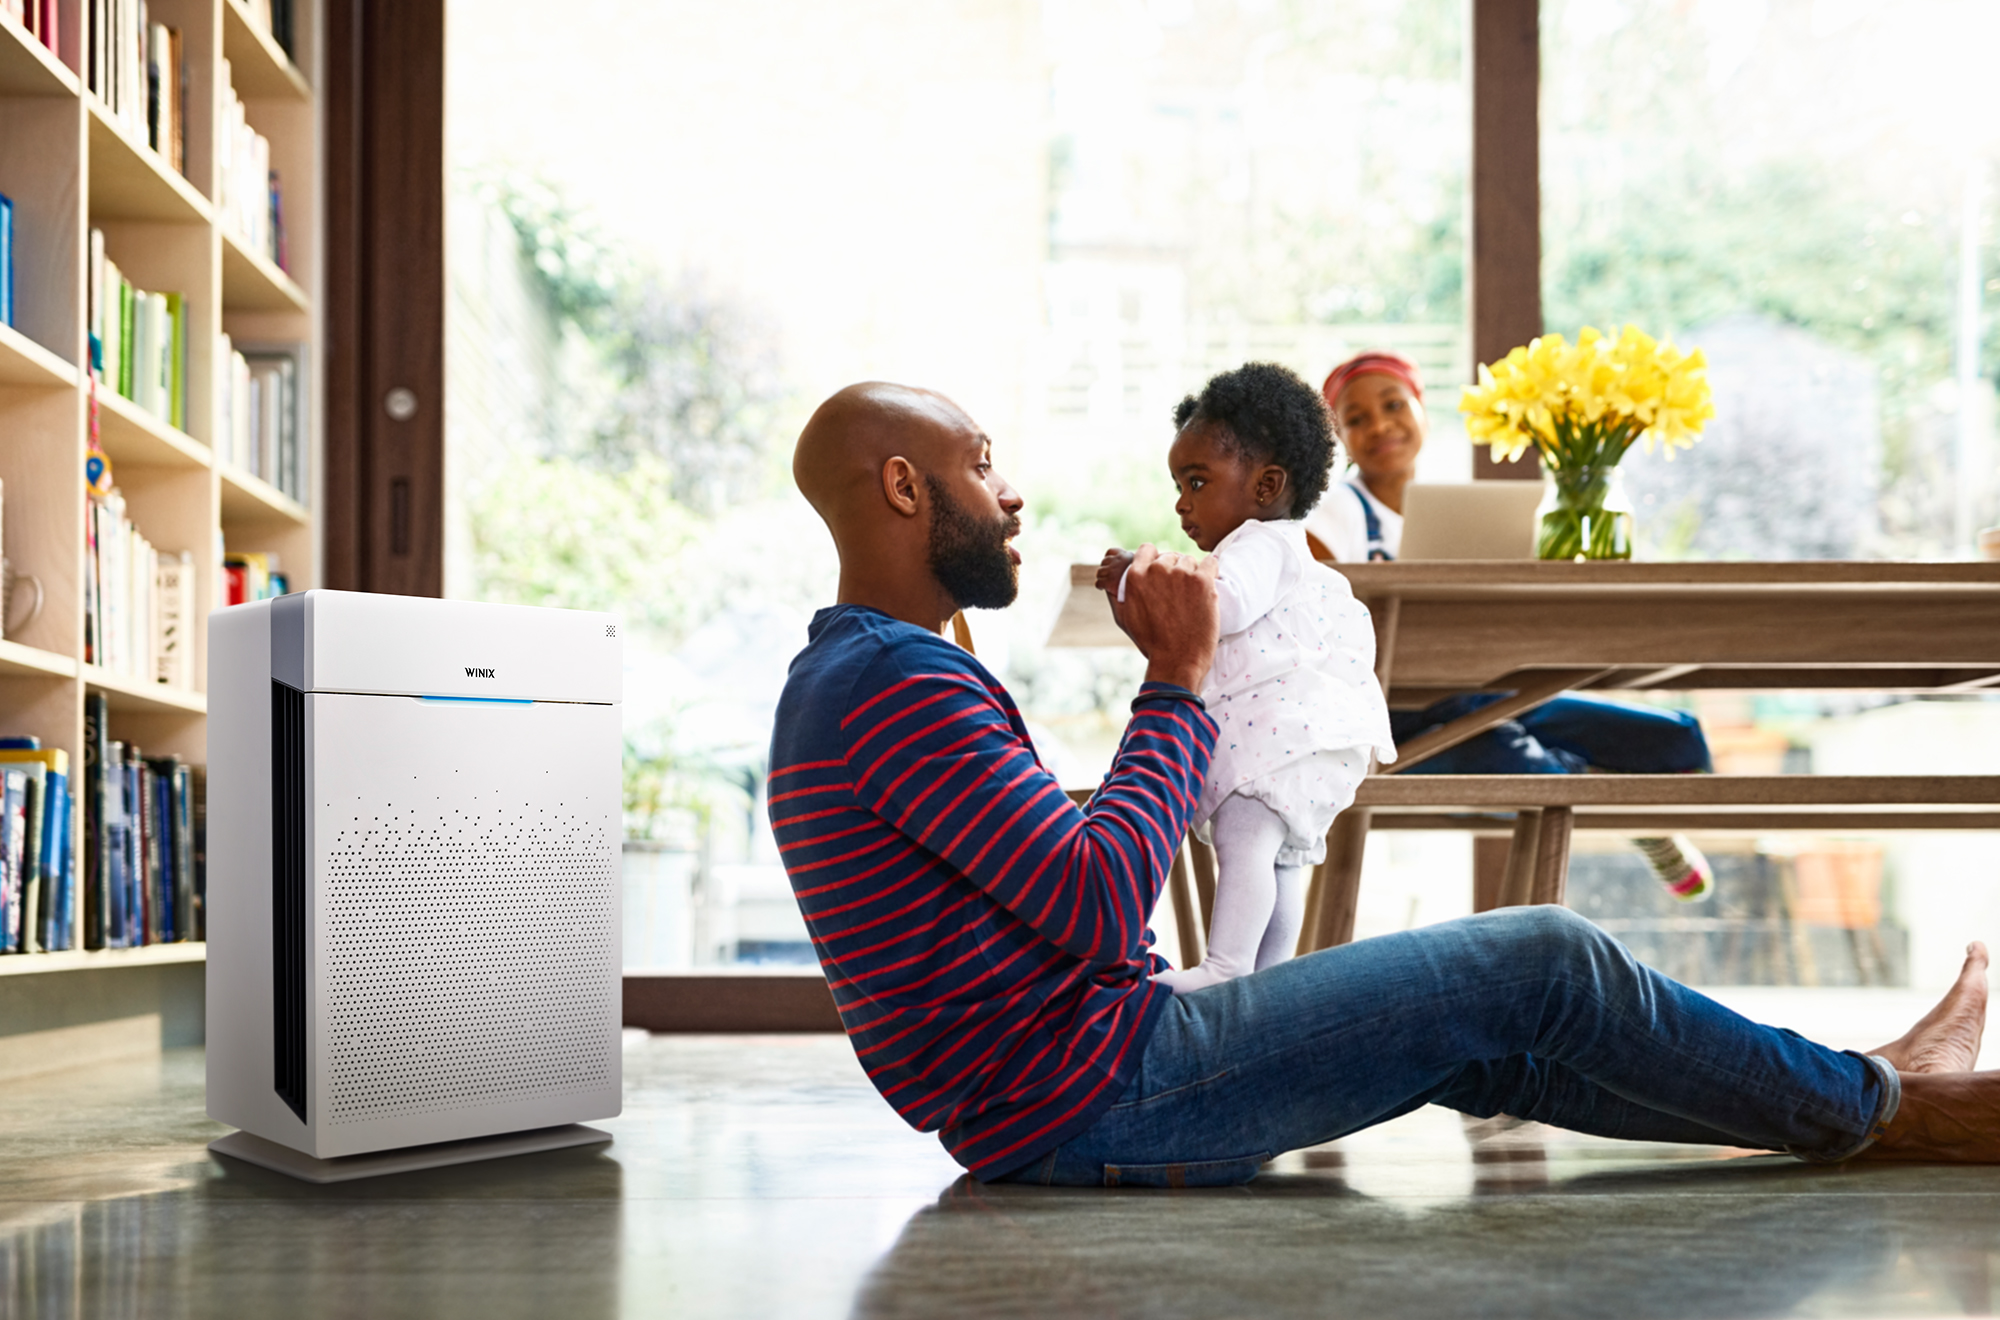 HR900 air purifier on floor next to adult and child